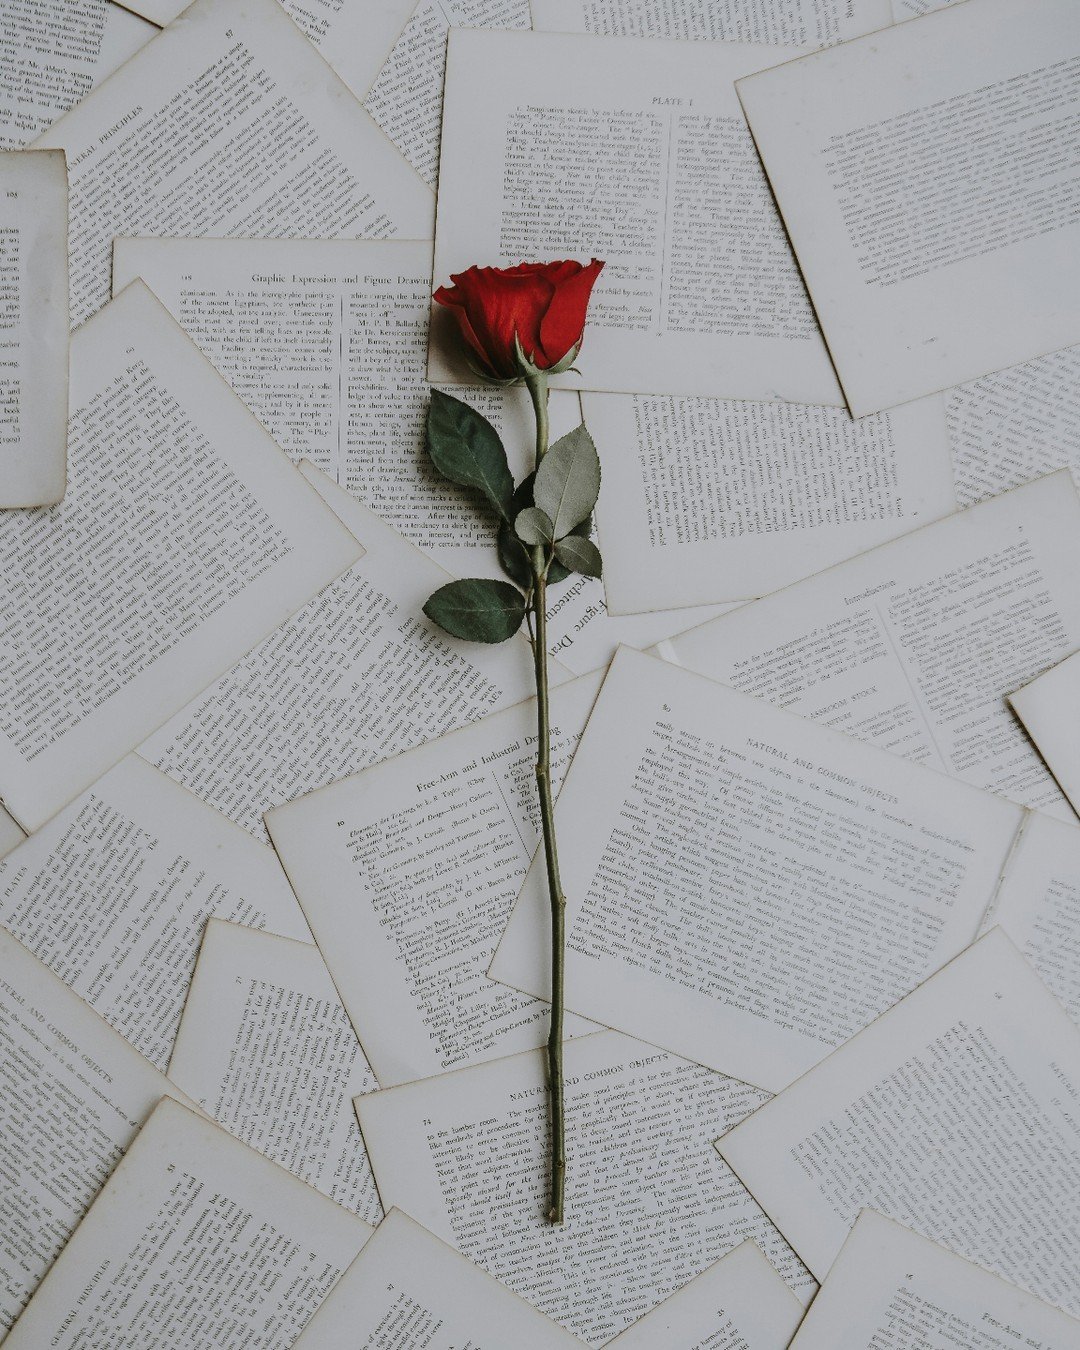 Feli&ccedil; Sant Jordi or Happy Saint George's Day from Barcelona! 🌹📚Today the city is full of roses and books to celebrate this beautiful Catalan tradition. Do you already have your book and rose ready to give to your loved ones?
.
.
&iexcl;Feliz